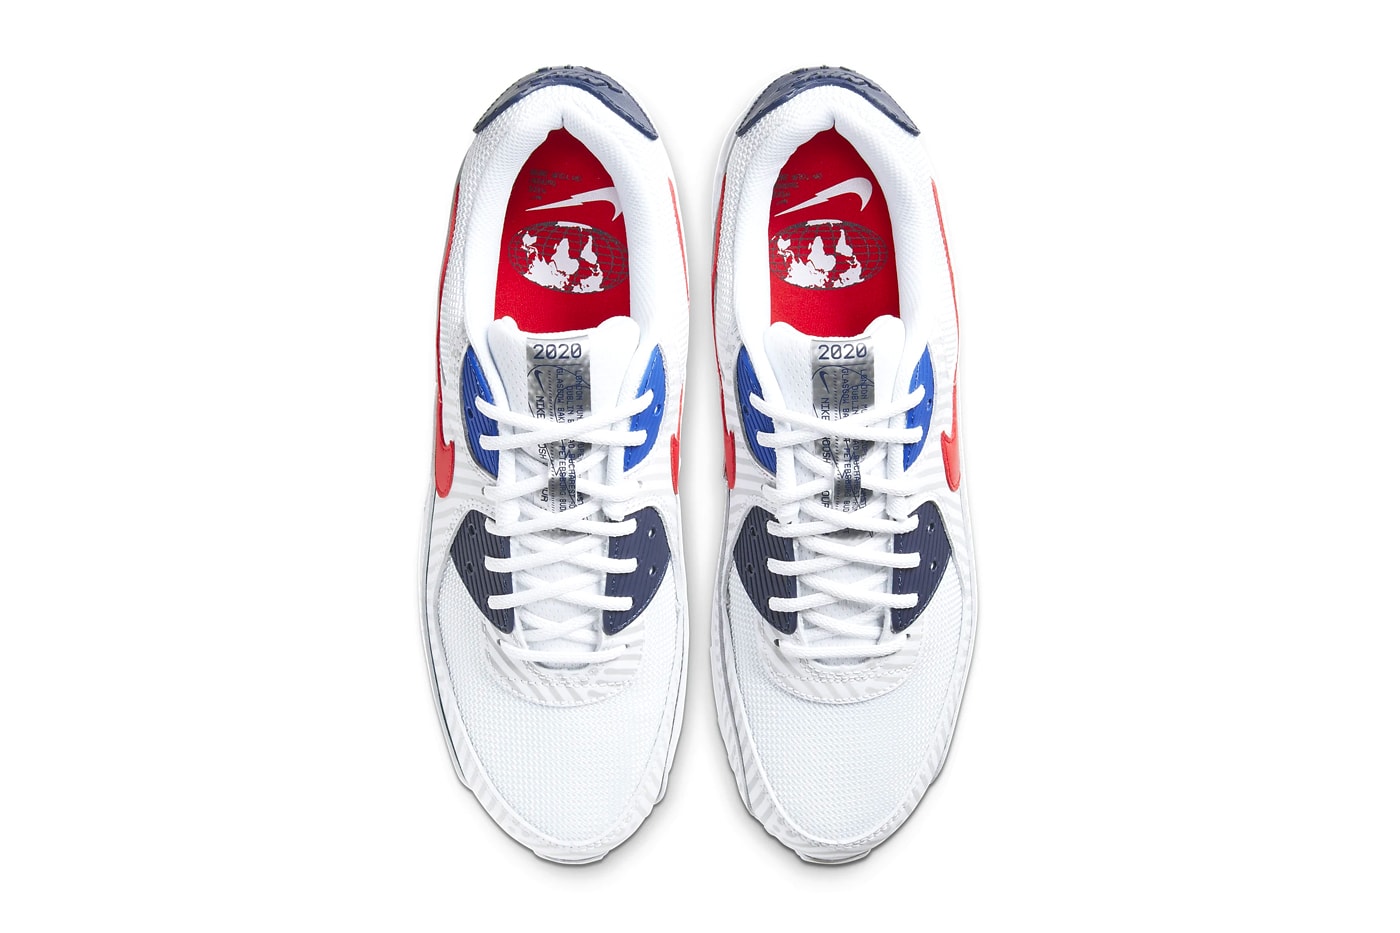 Nike Air Max 90 white University Red Bright Blue midnight navy reflective stripes streetwear trainers runners sneakers shoes kicks ss20 CW7574 100